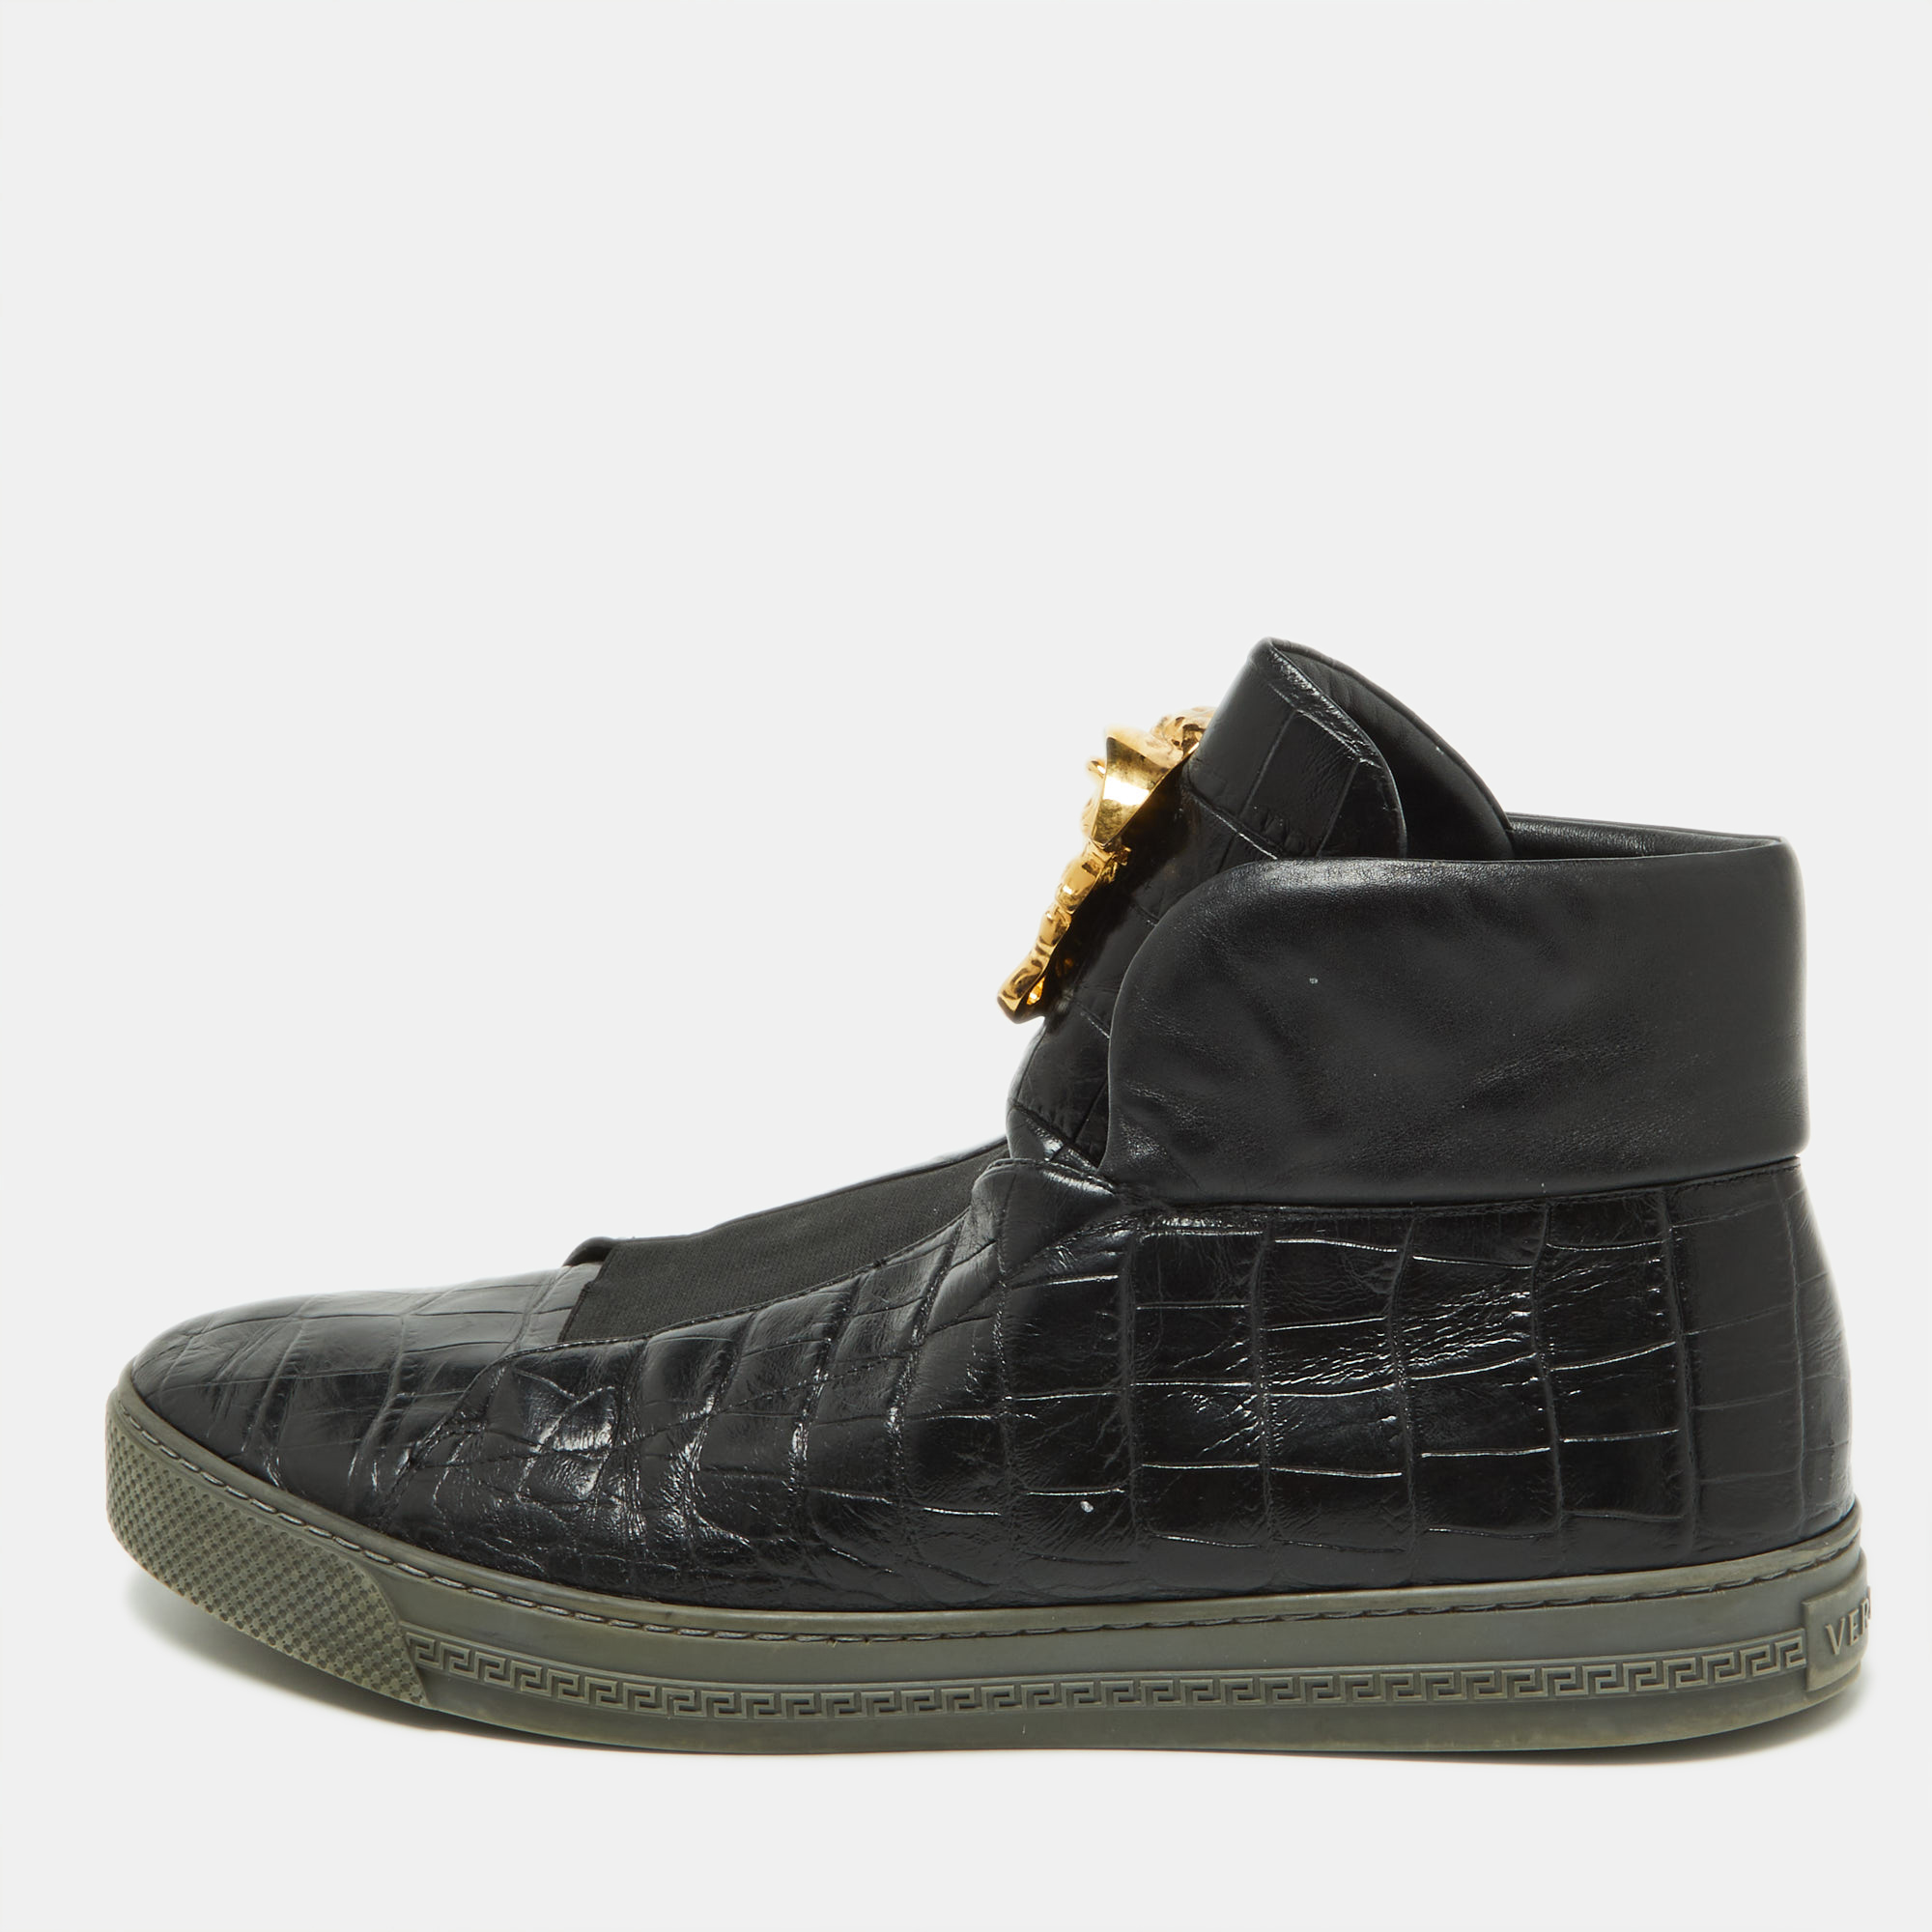 

Versace Black Croc Embossed Leather Palazzo Medusa High Top Sneakers Size